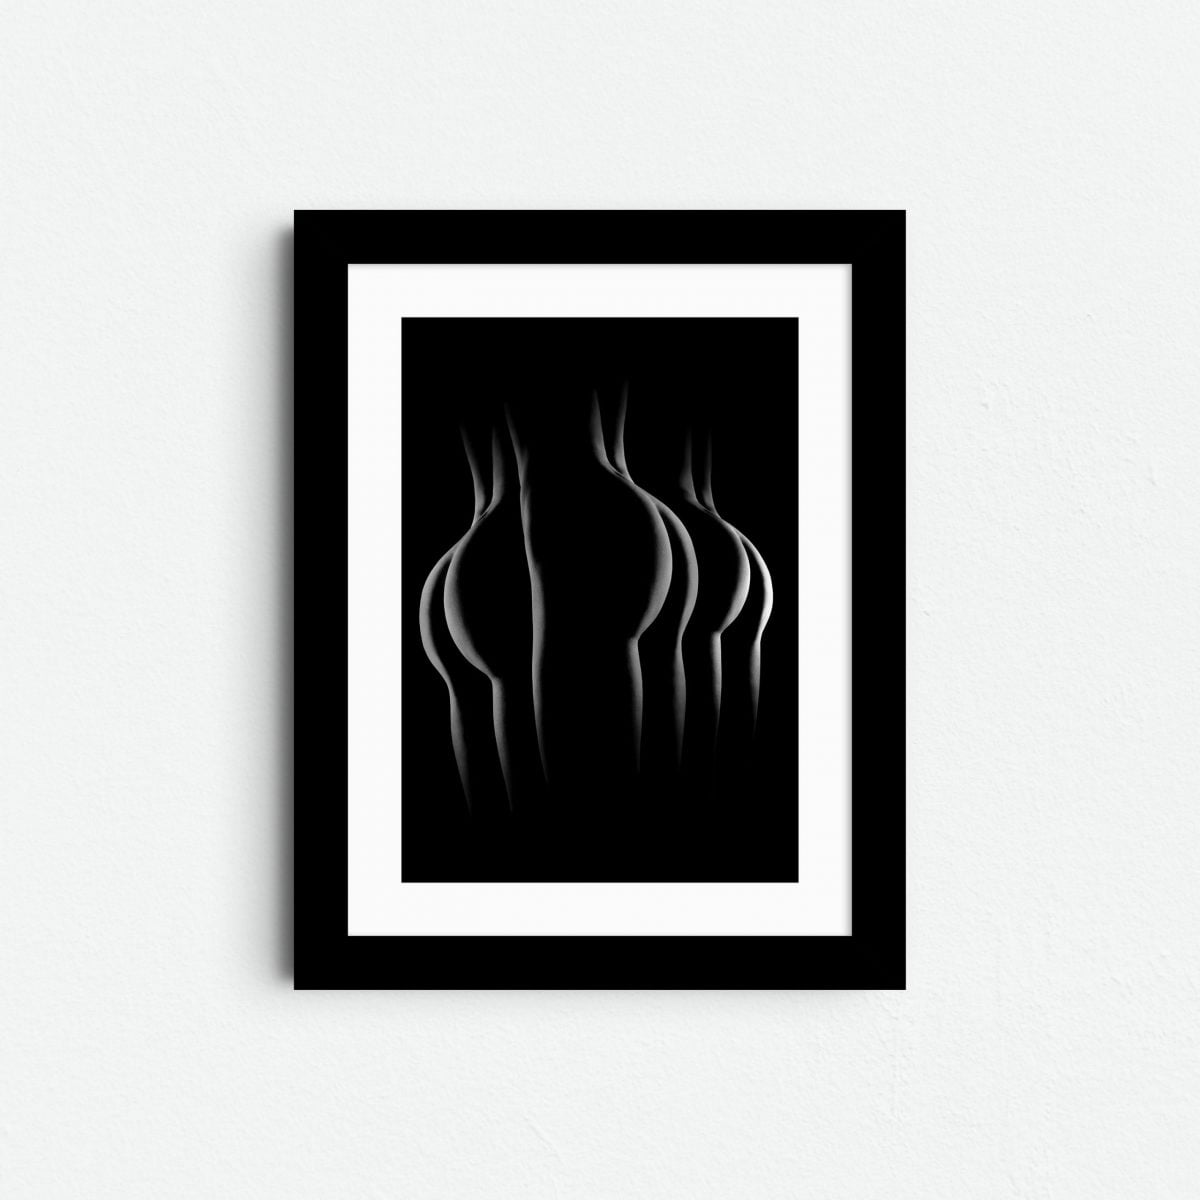 around-the-world-nude-erotic-wall-art-prints-framed-portrait